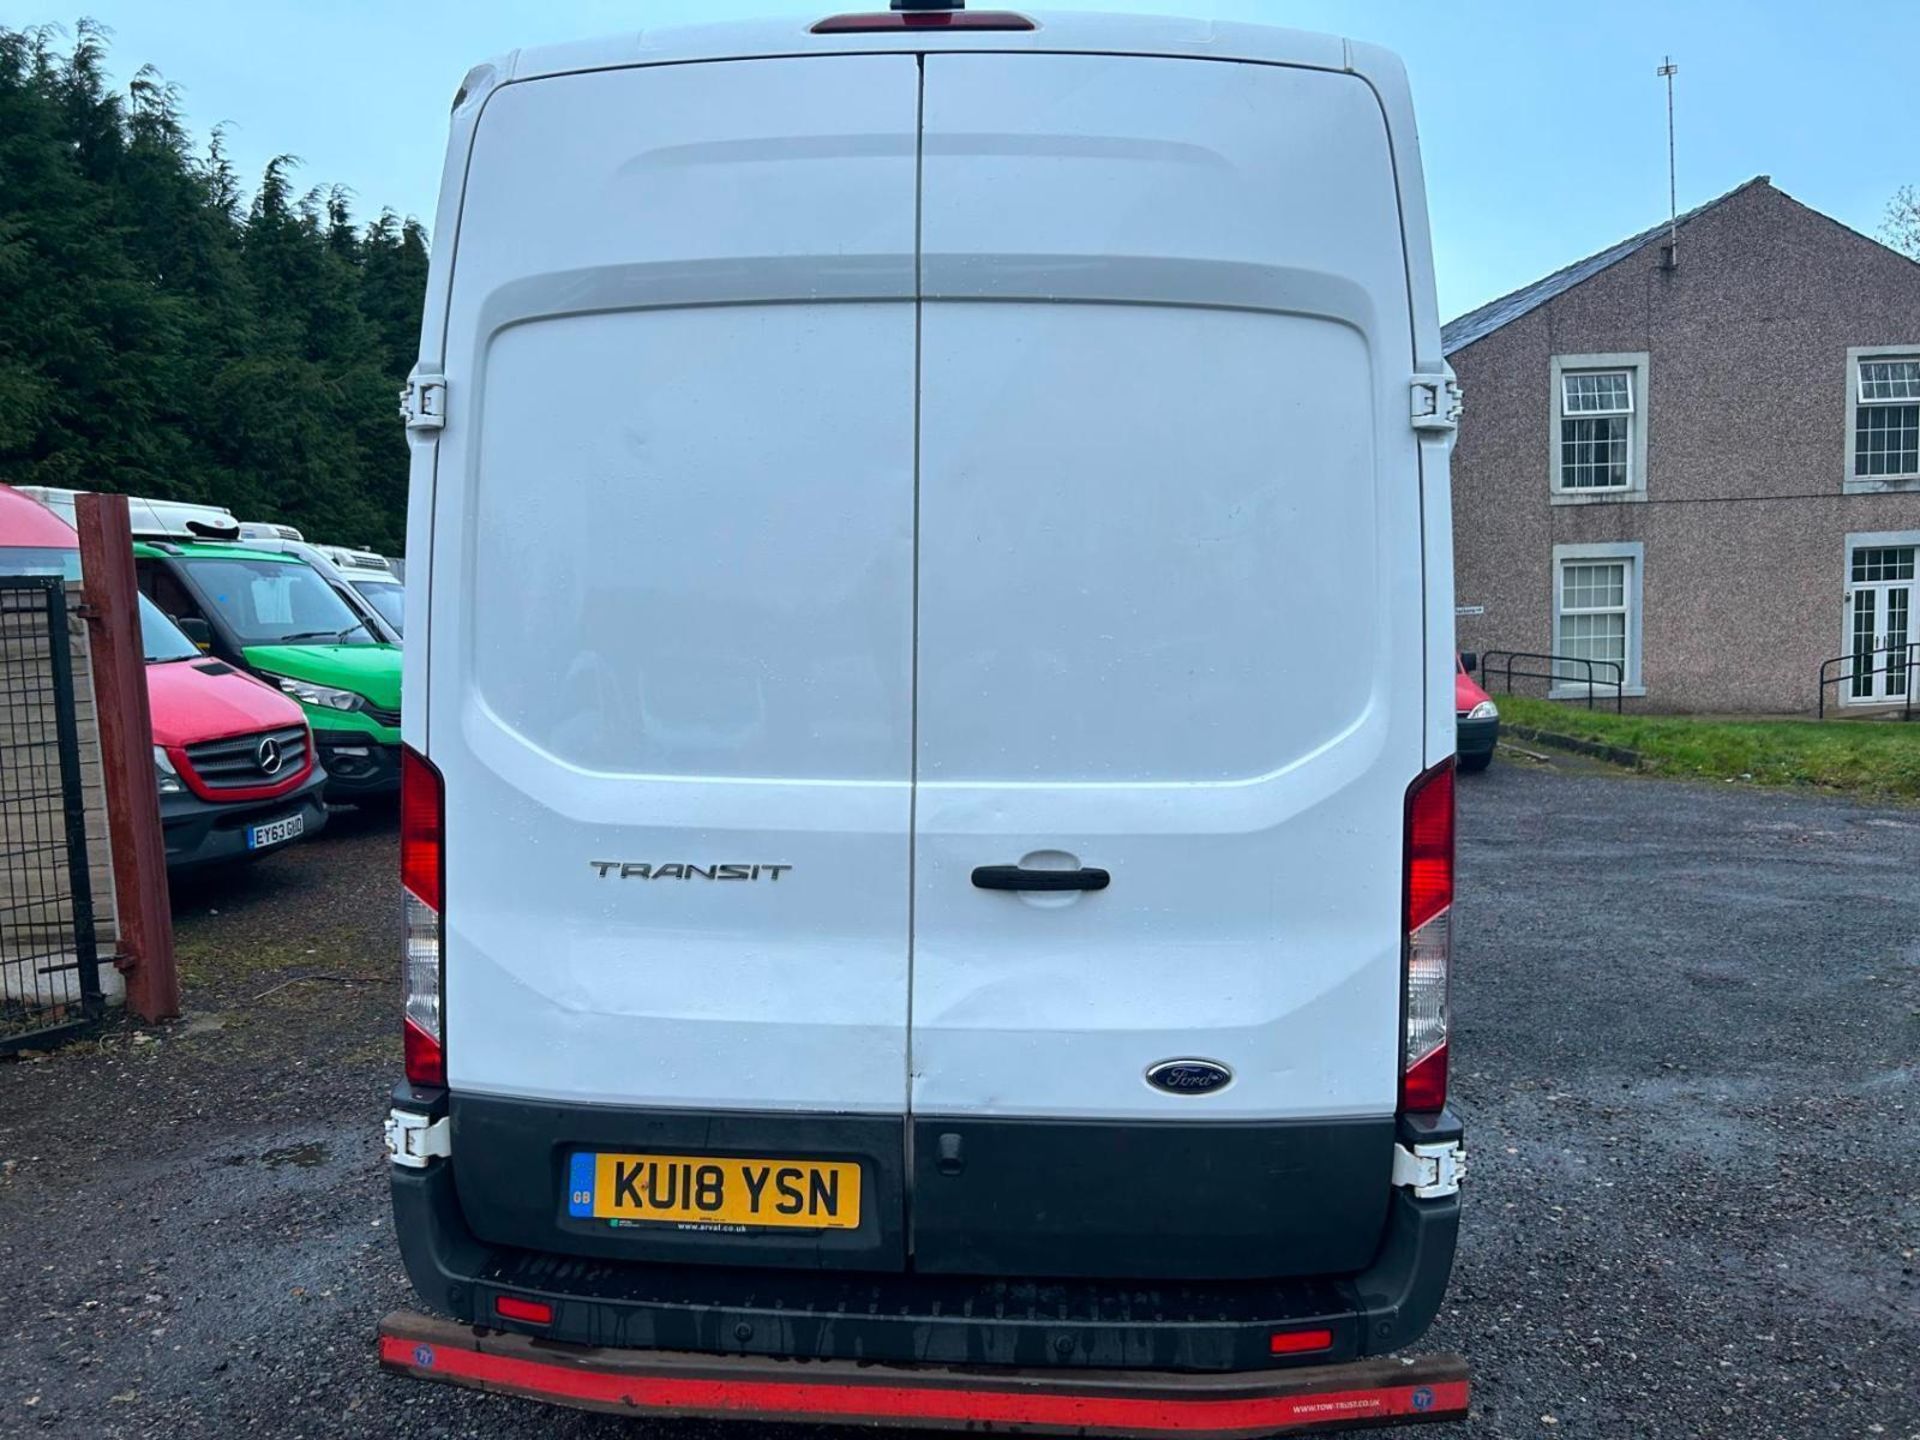 >>>SPECIAL CLEARANCE<<< 2018 FORD TRANSIT 2.0 TDCI 130PS L3 H3 LONG WHEEL BASE PANEL VAN - Image 8 of 13